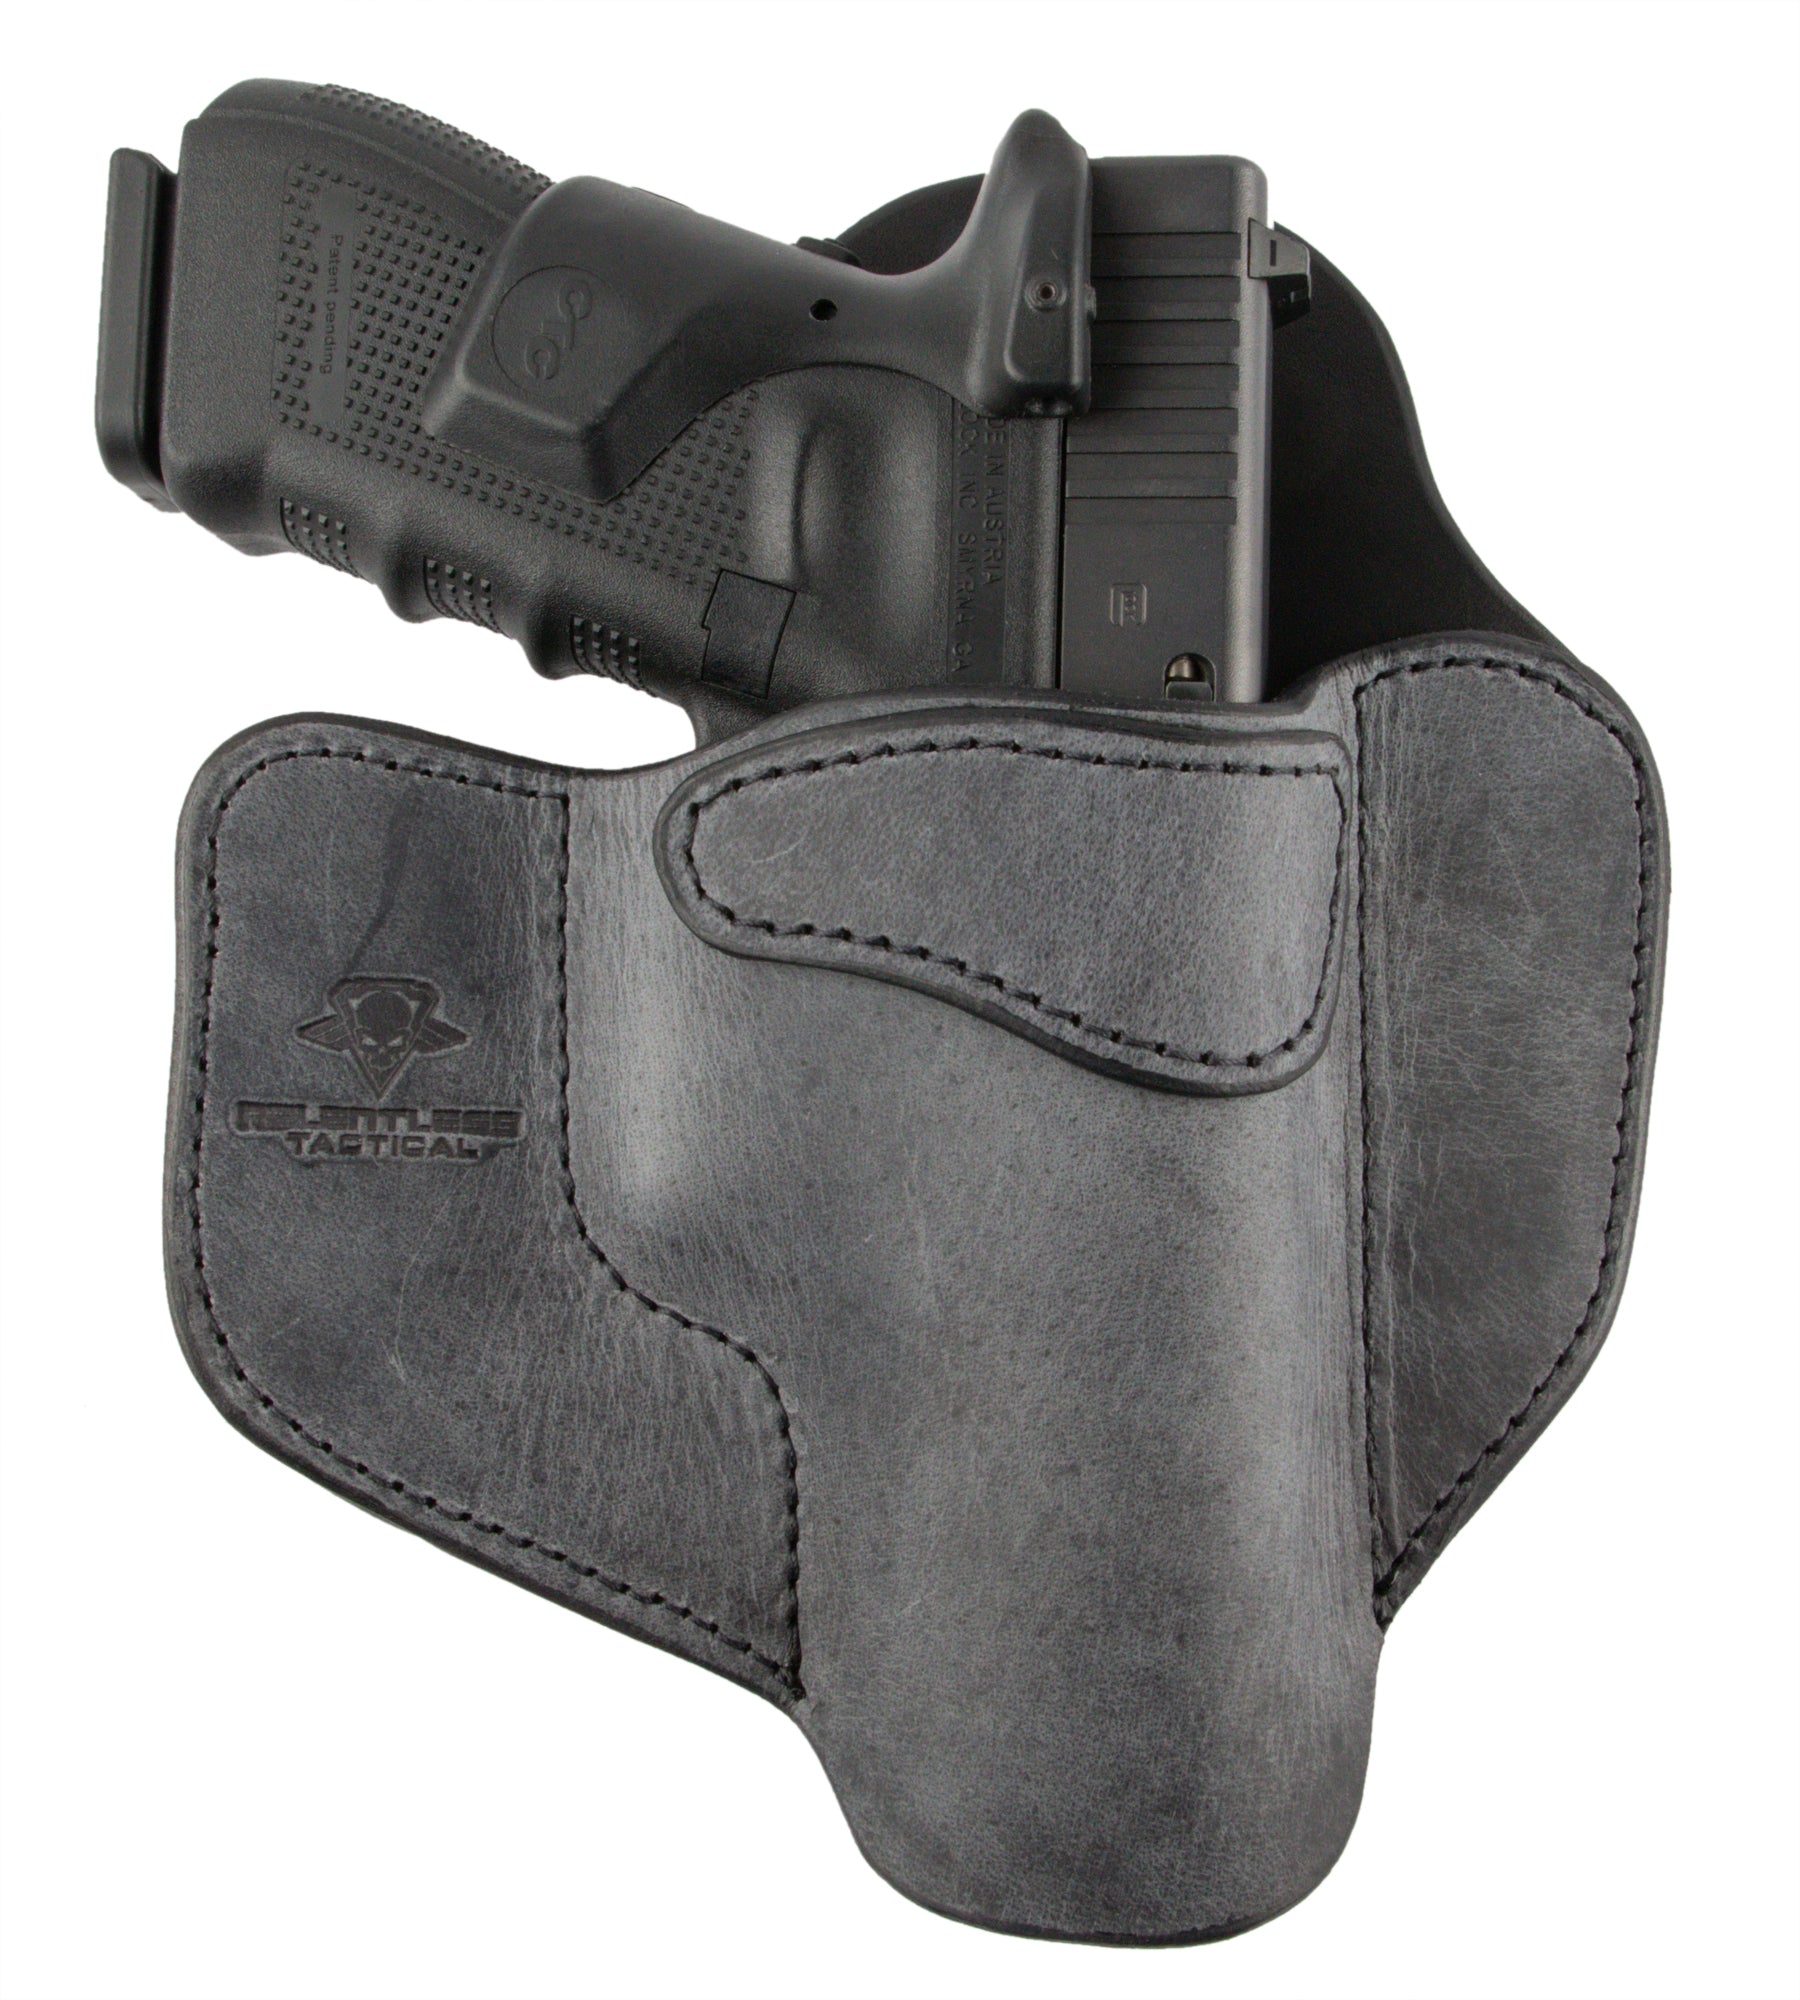 Glock 17 / 22 IWB Leather Holster - Lifetime Warranty - Made in U.S.A.